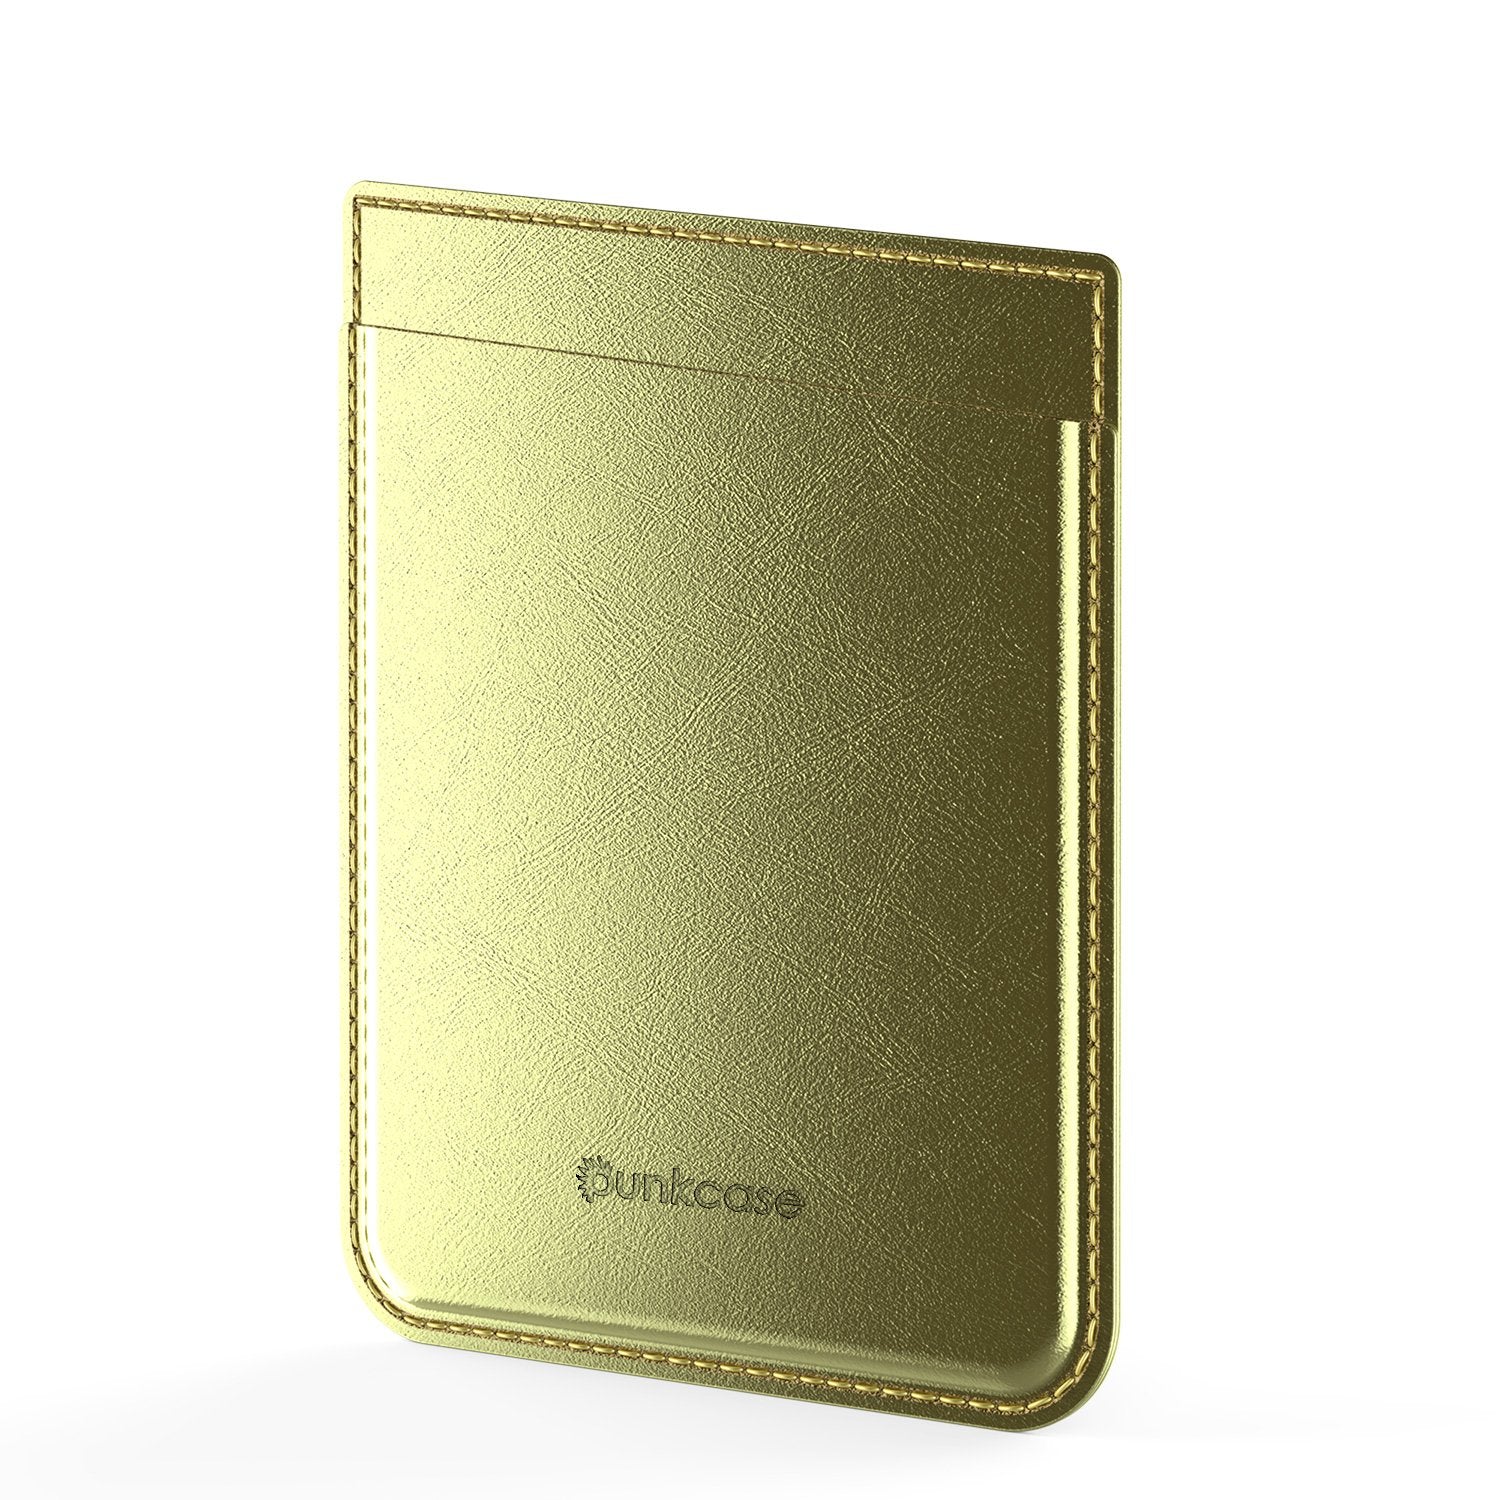 PunkCase CardStud Deluxe Stick On Wallet | Adhesive Card Holder Attachment for Back of iPhone, Android & More | Leather Pouch | [Gold] - PunkCase NZ